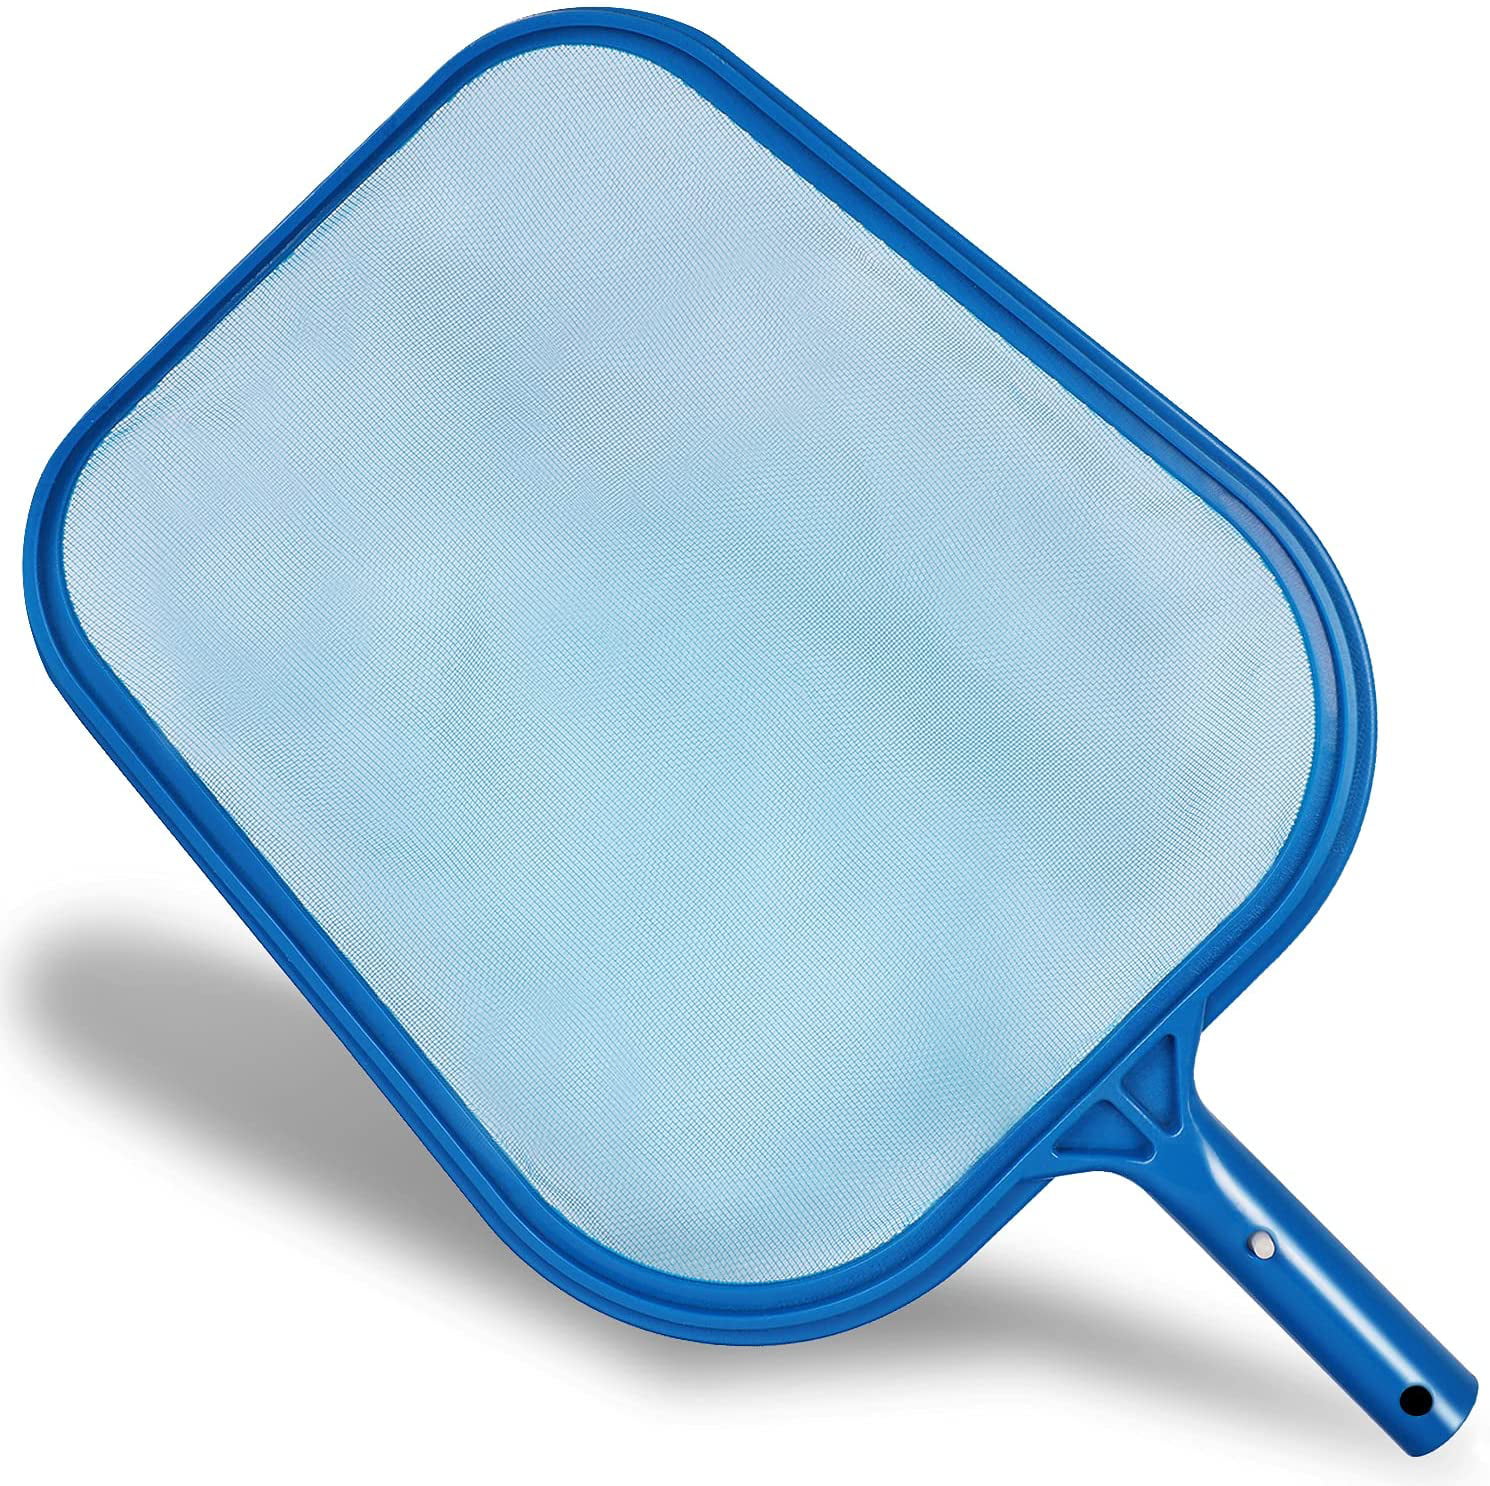 Blissun Pool Skimmer Net Fine Mesh Deep Bag Catcher Hot Tubs Spas and Fountains Swimming Pool Leaf Rake Skimmer Net Cleaning Tool for Cleaning Swimming Pools 